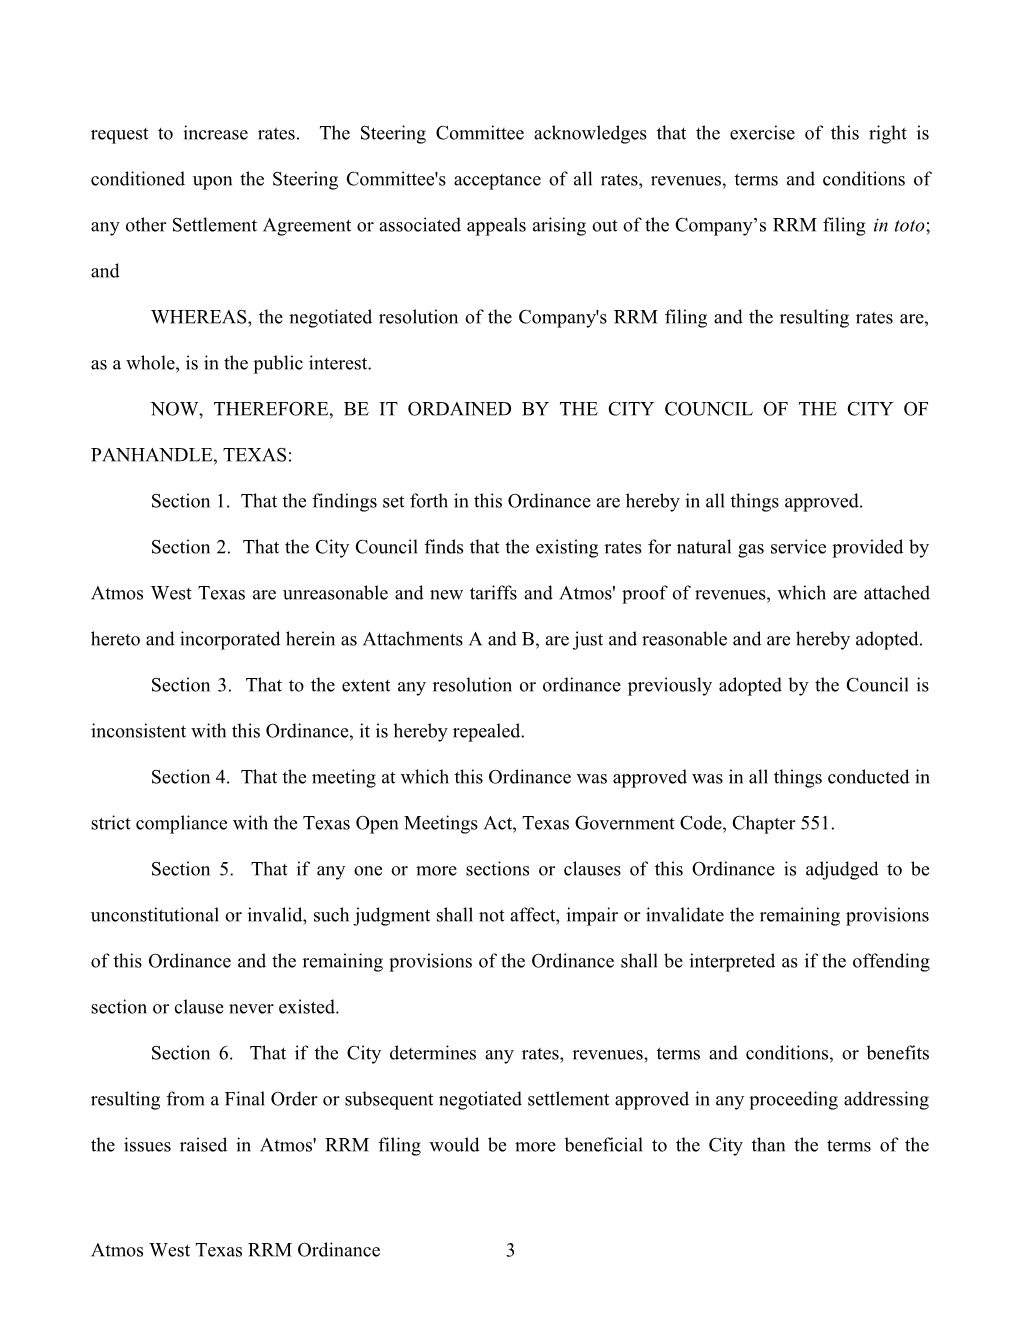 An Ordinance of the City Council of the City of PANHANDLE, Texas, ( City ) Approving A